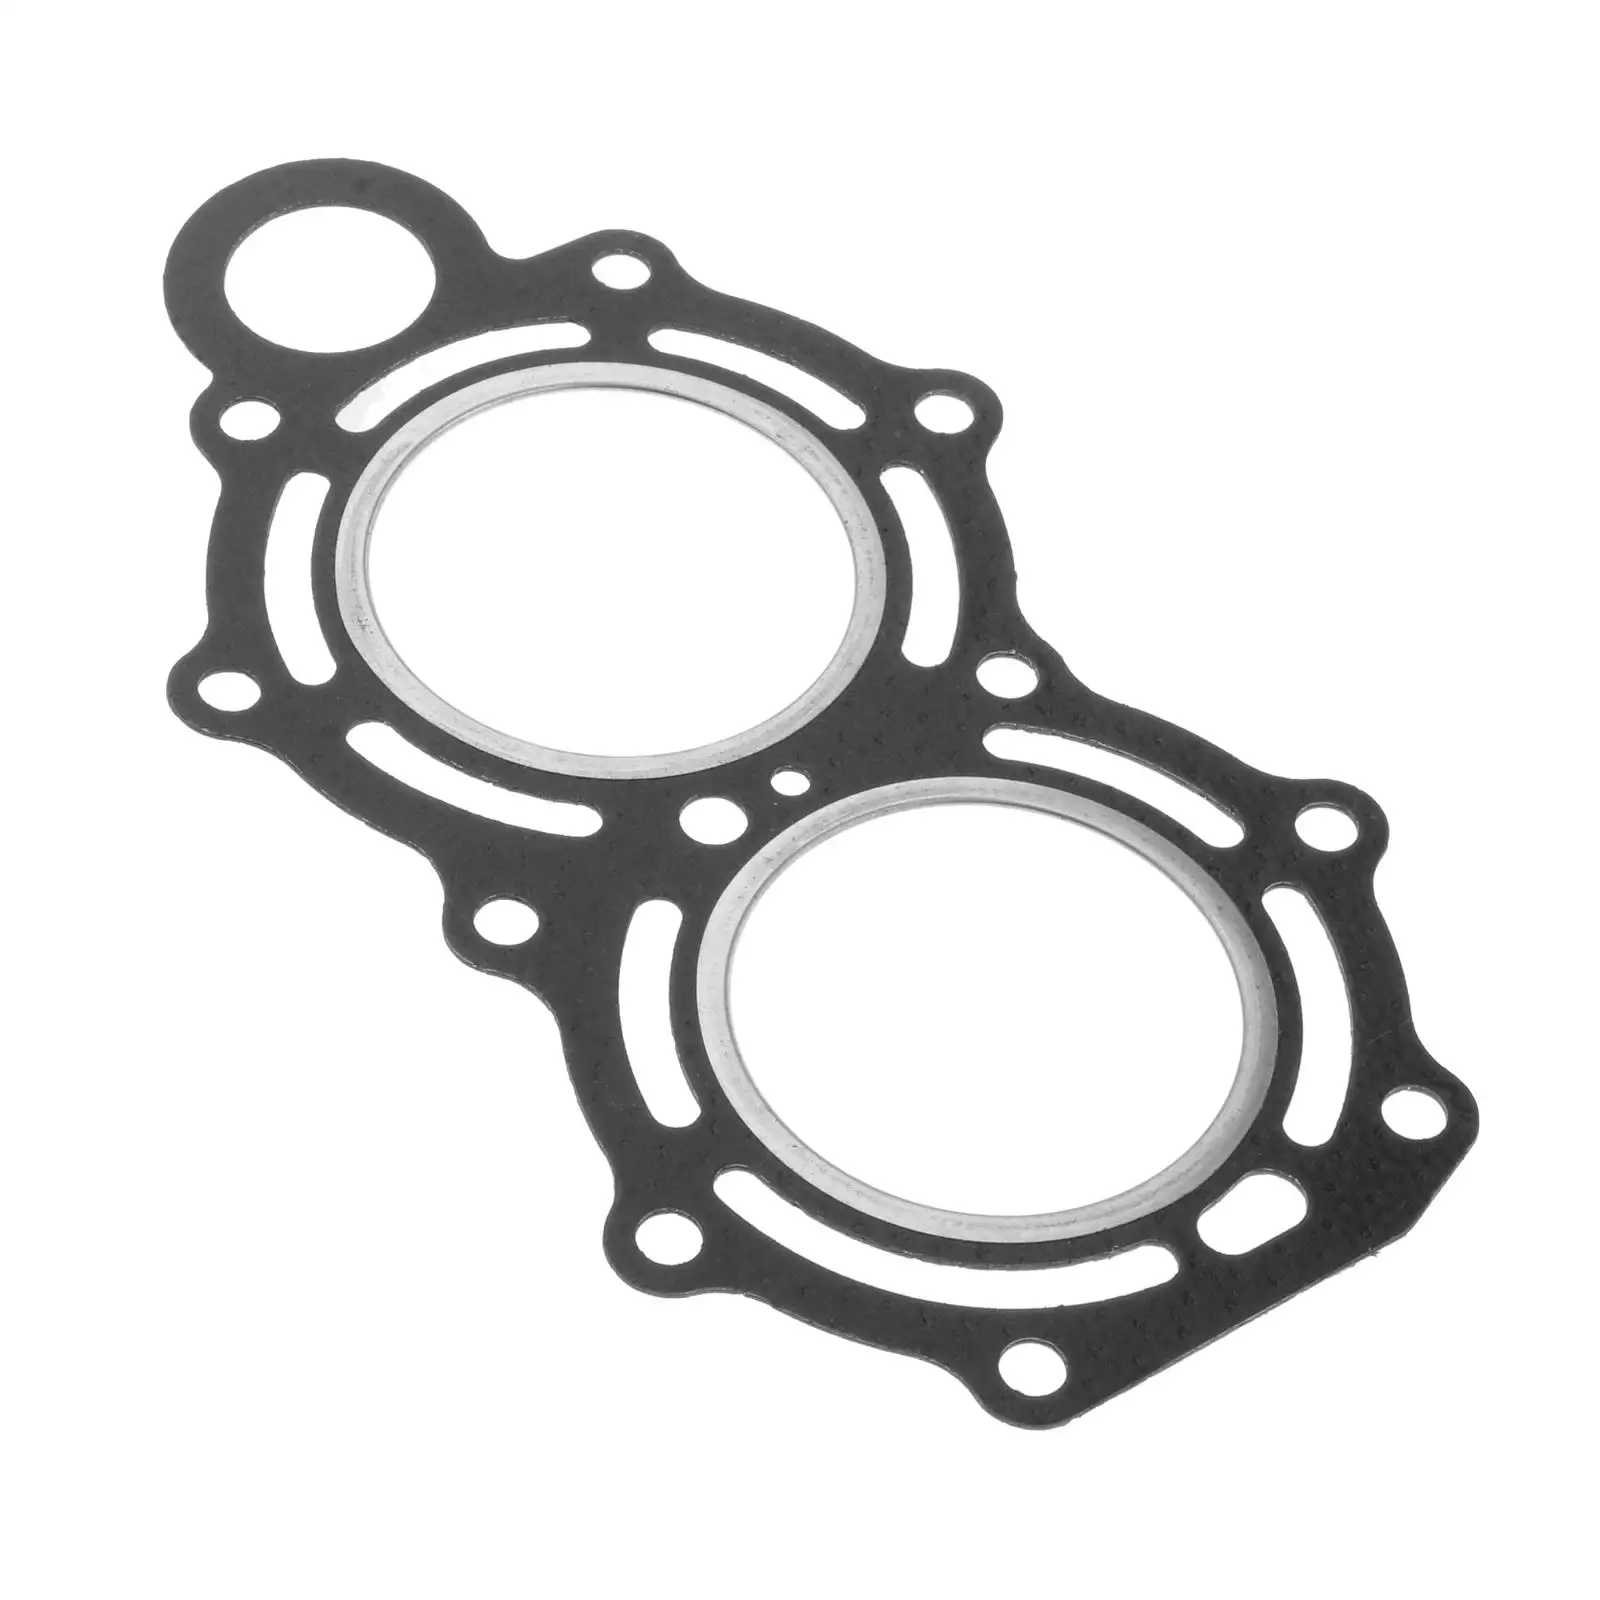 Boat Cylinder Head Gasket No. 3B2-01005 for Tohatsu 2T 6.8HP-9.8HP Outboard Motor Accessories